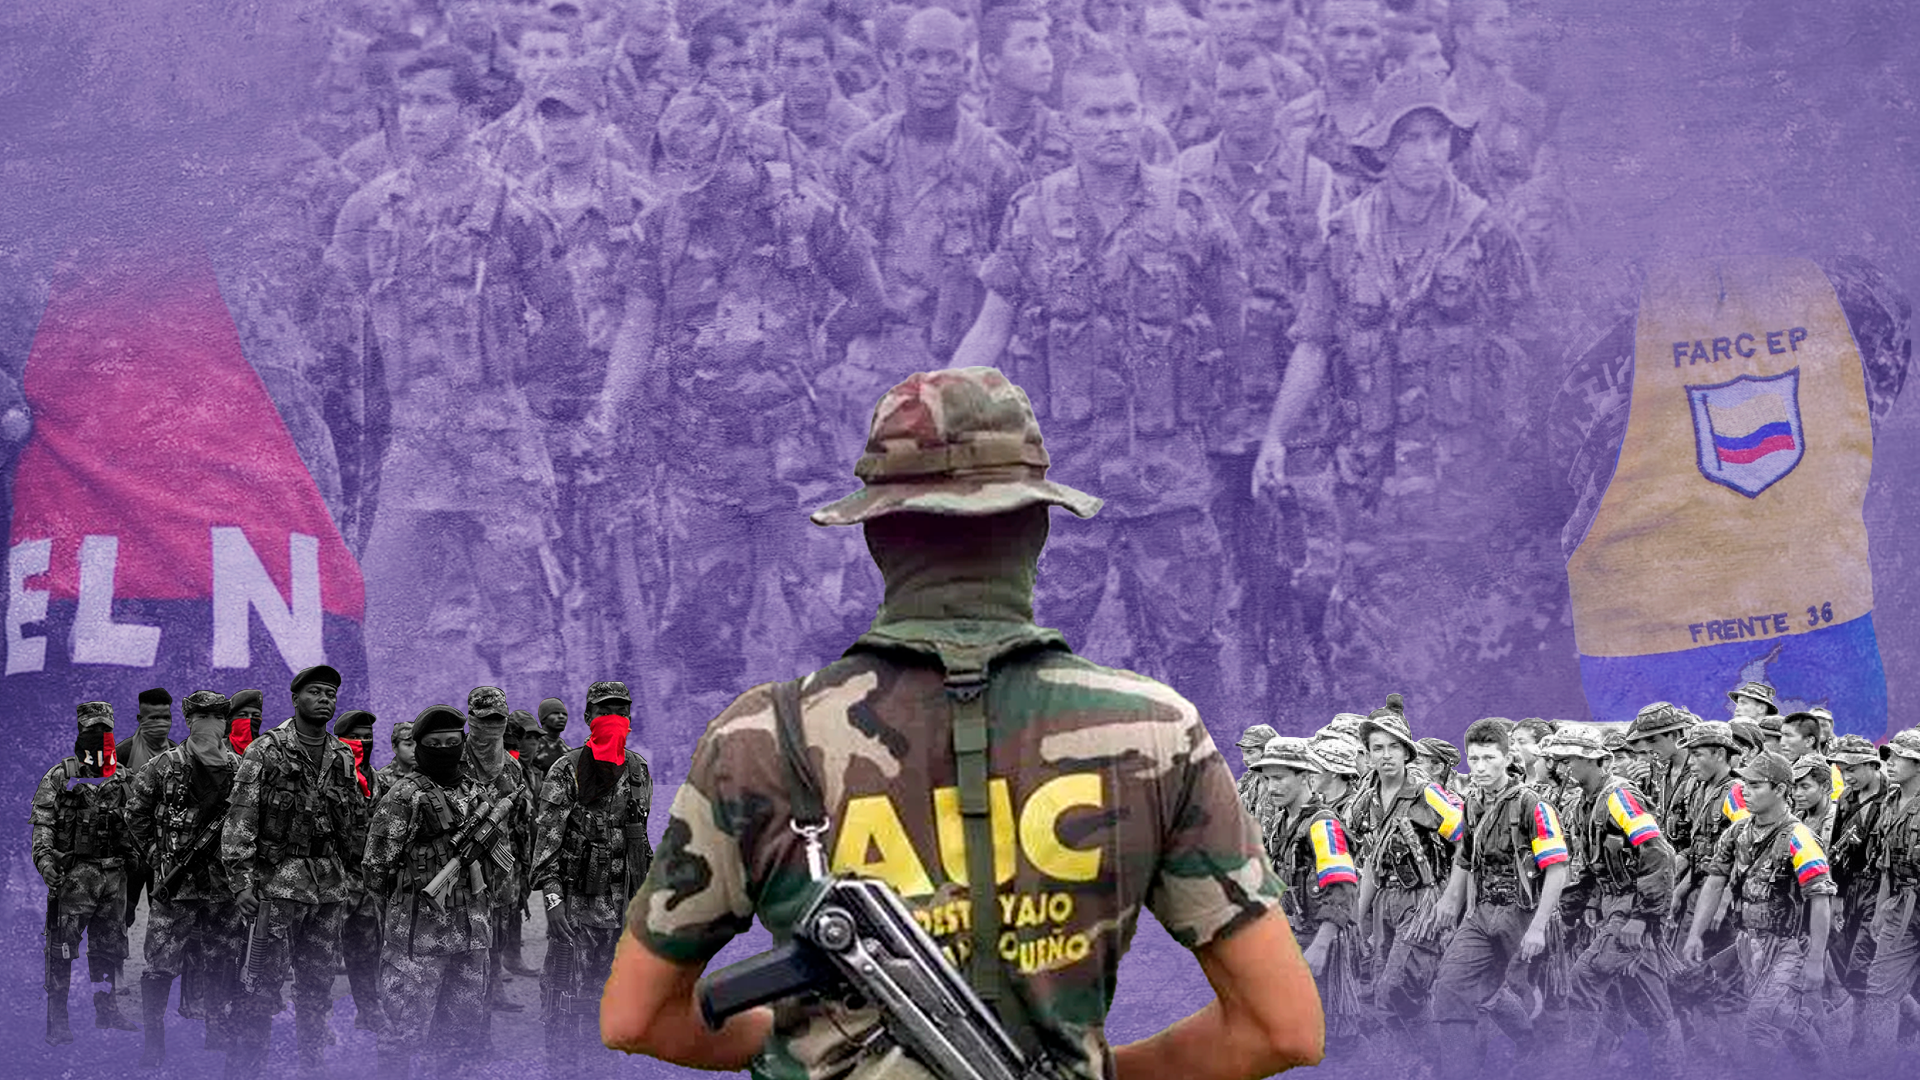 According to the volume 'Colombia adentro' of the Final Report of the Truth Commission, the guerrillas contemplated taking towns to consolidate their expansion.  In response, paramilitary groups resorted to the same strategy to confront the Farc and the ELN.  Infobae (Jesus Aviles)